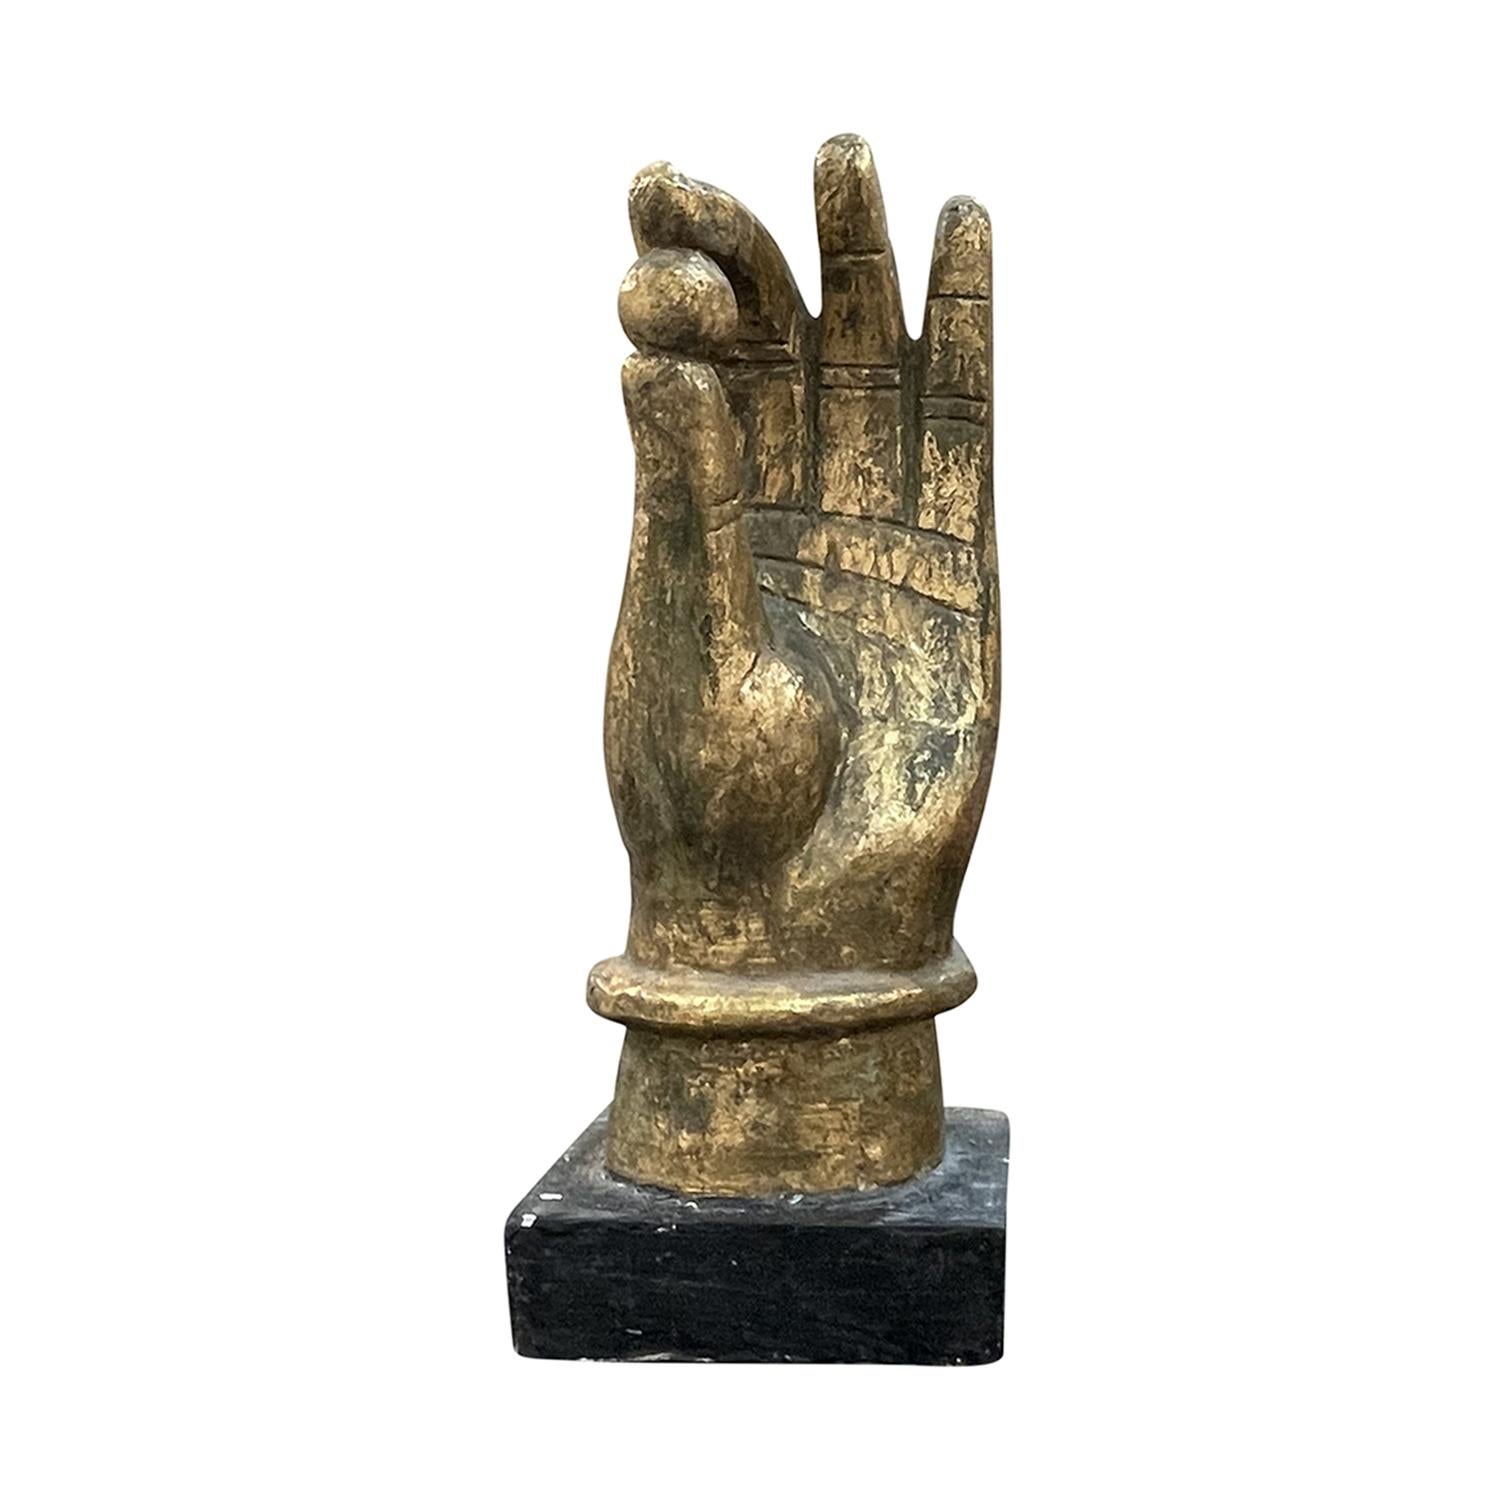 A single, antique Asian tropical wood hand, the pearl of wisdom ornament, in good condition. The pearl was a symbol of the most valuable treasure, wisdom. This ornament will add charm to any home. Minor fading due to age. Wear consistent with age